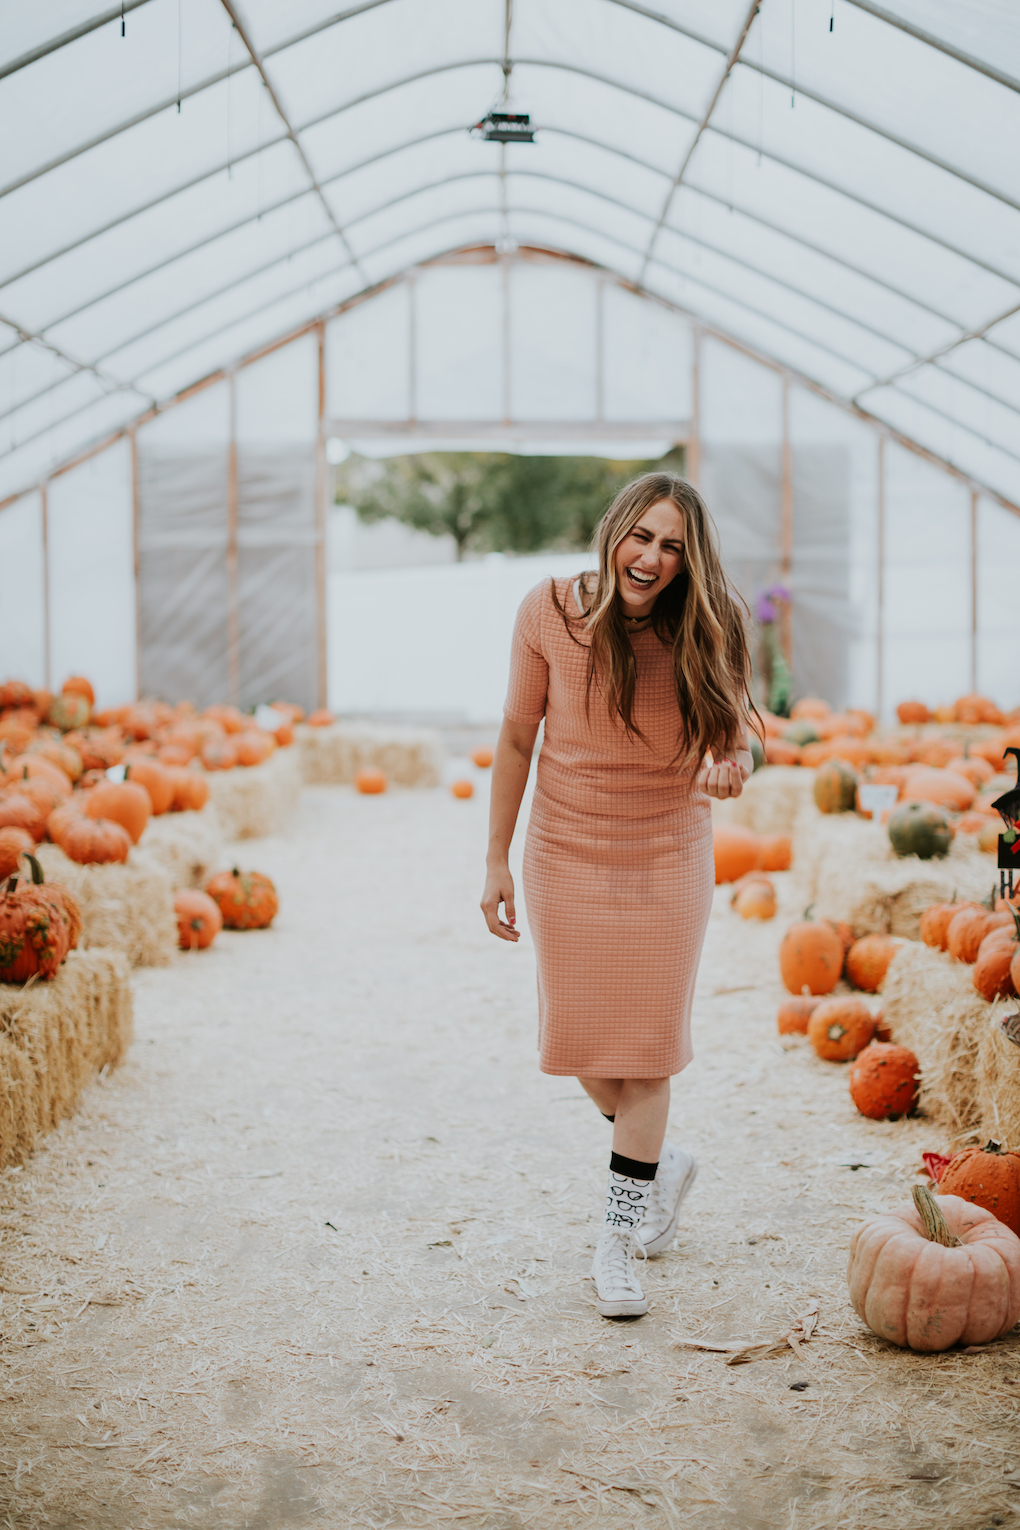 girl in quilted pink dress with tall glasses socks and converse on standing at pumpkin patch with loosely curled brown hair